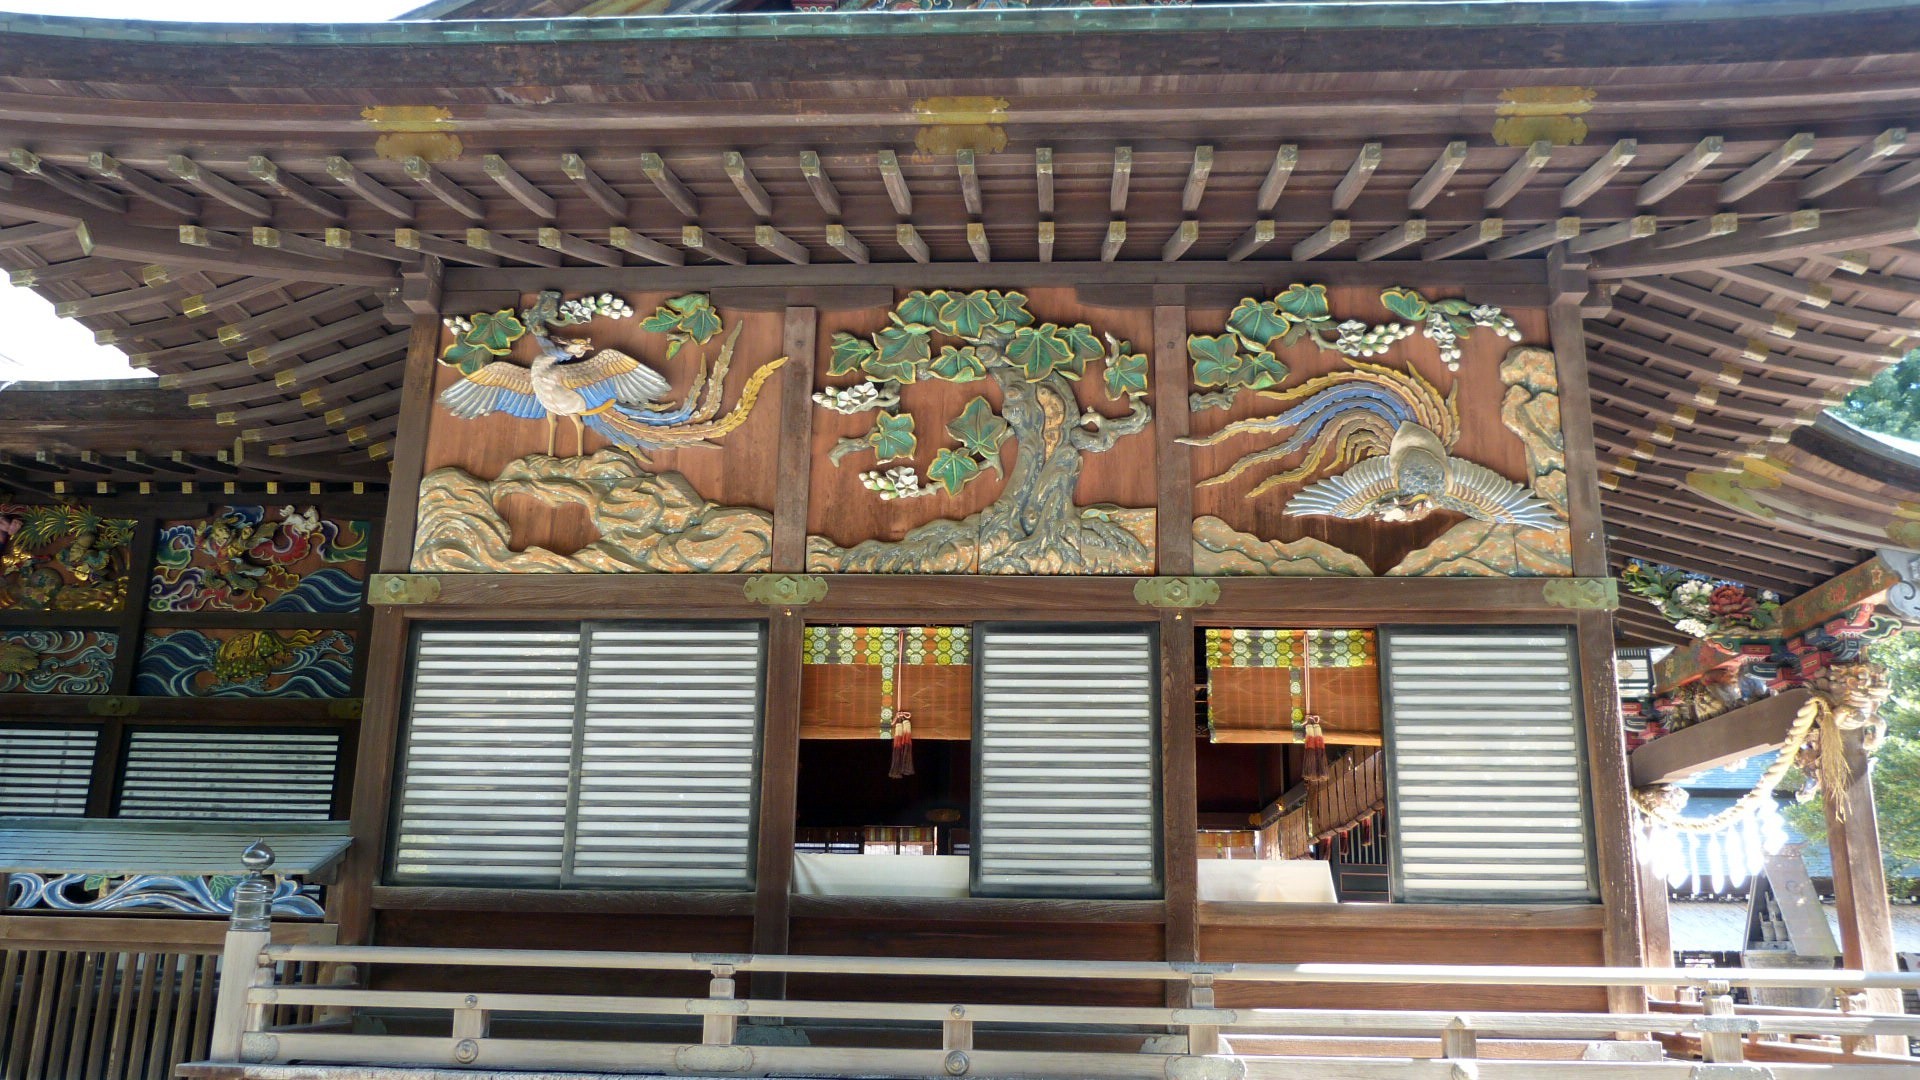 a view of the shrine showing decorative panels of carved and painted wood